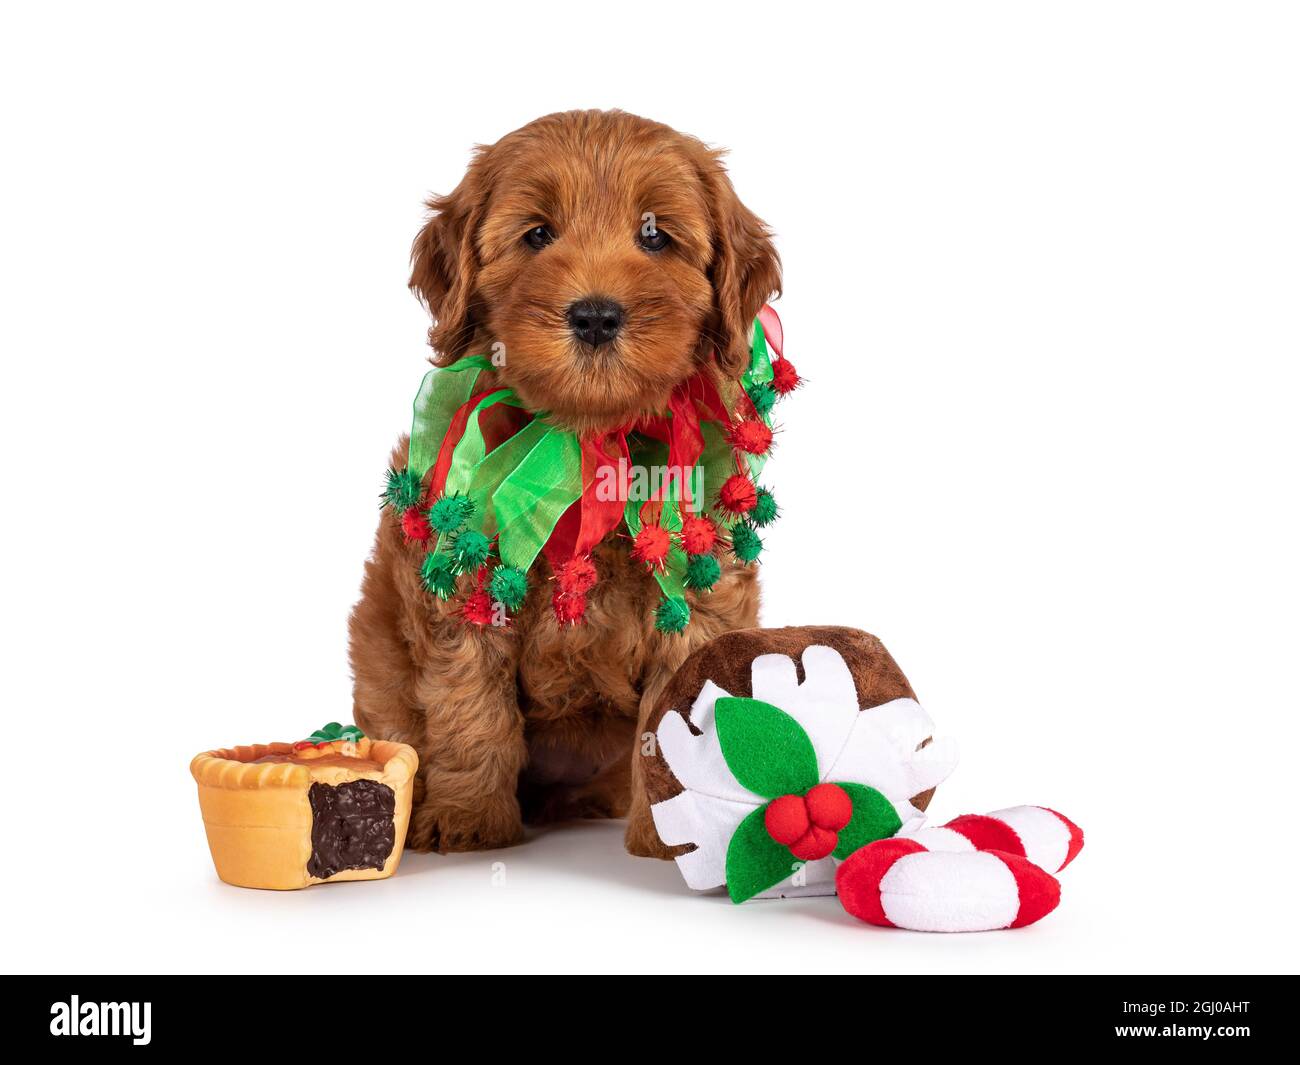 Adorable Cobberdog puppy aka Labradoodle dog, sitting up inbetween Christmas sweets. Looking straight towards camera. Isolated on a white background. Stock Photo